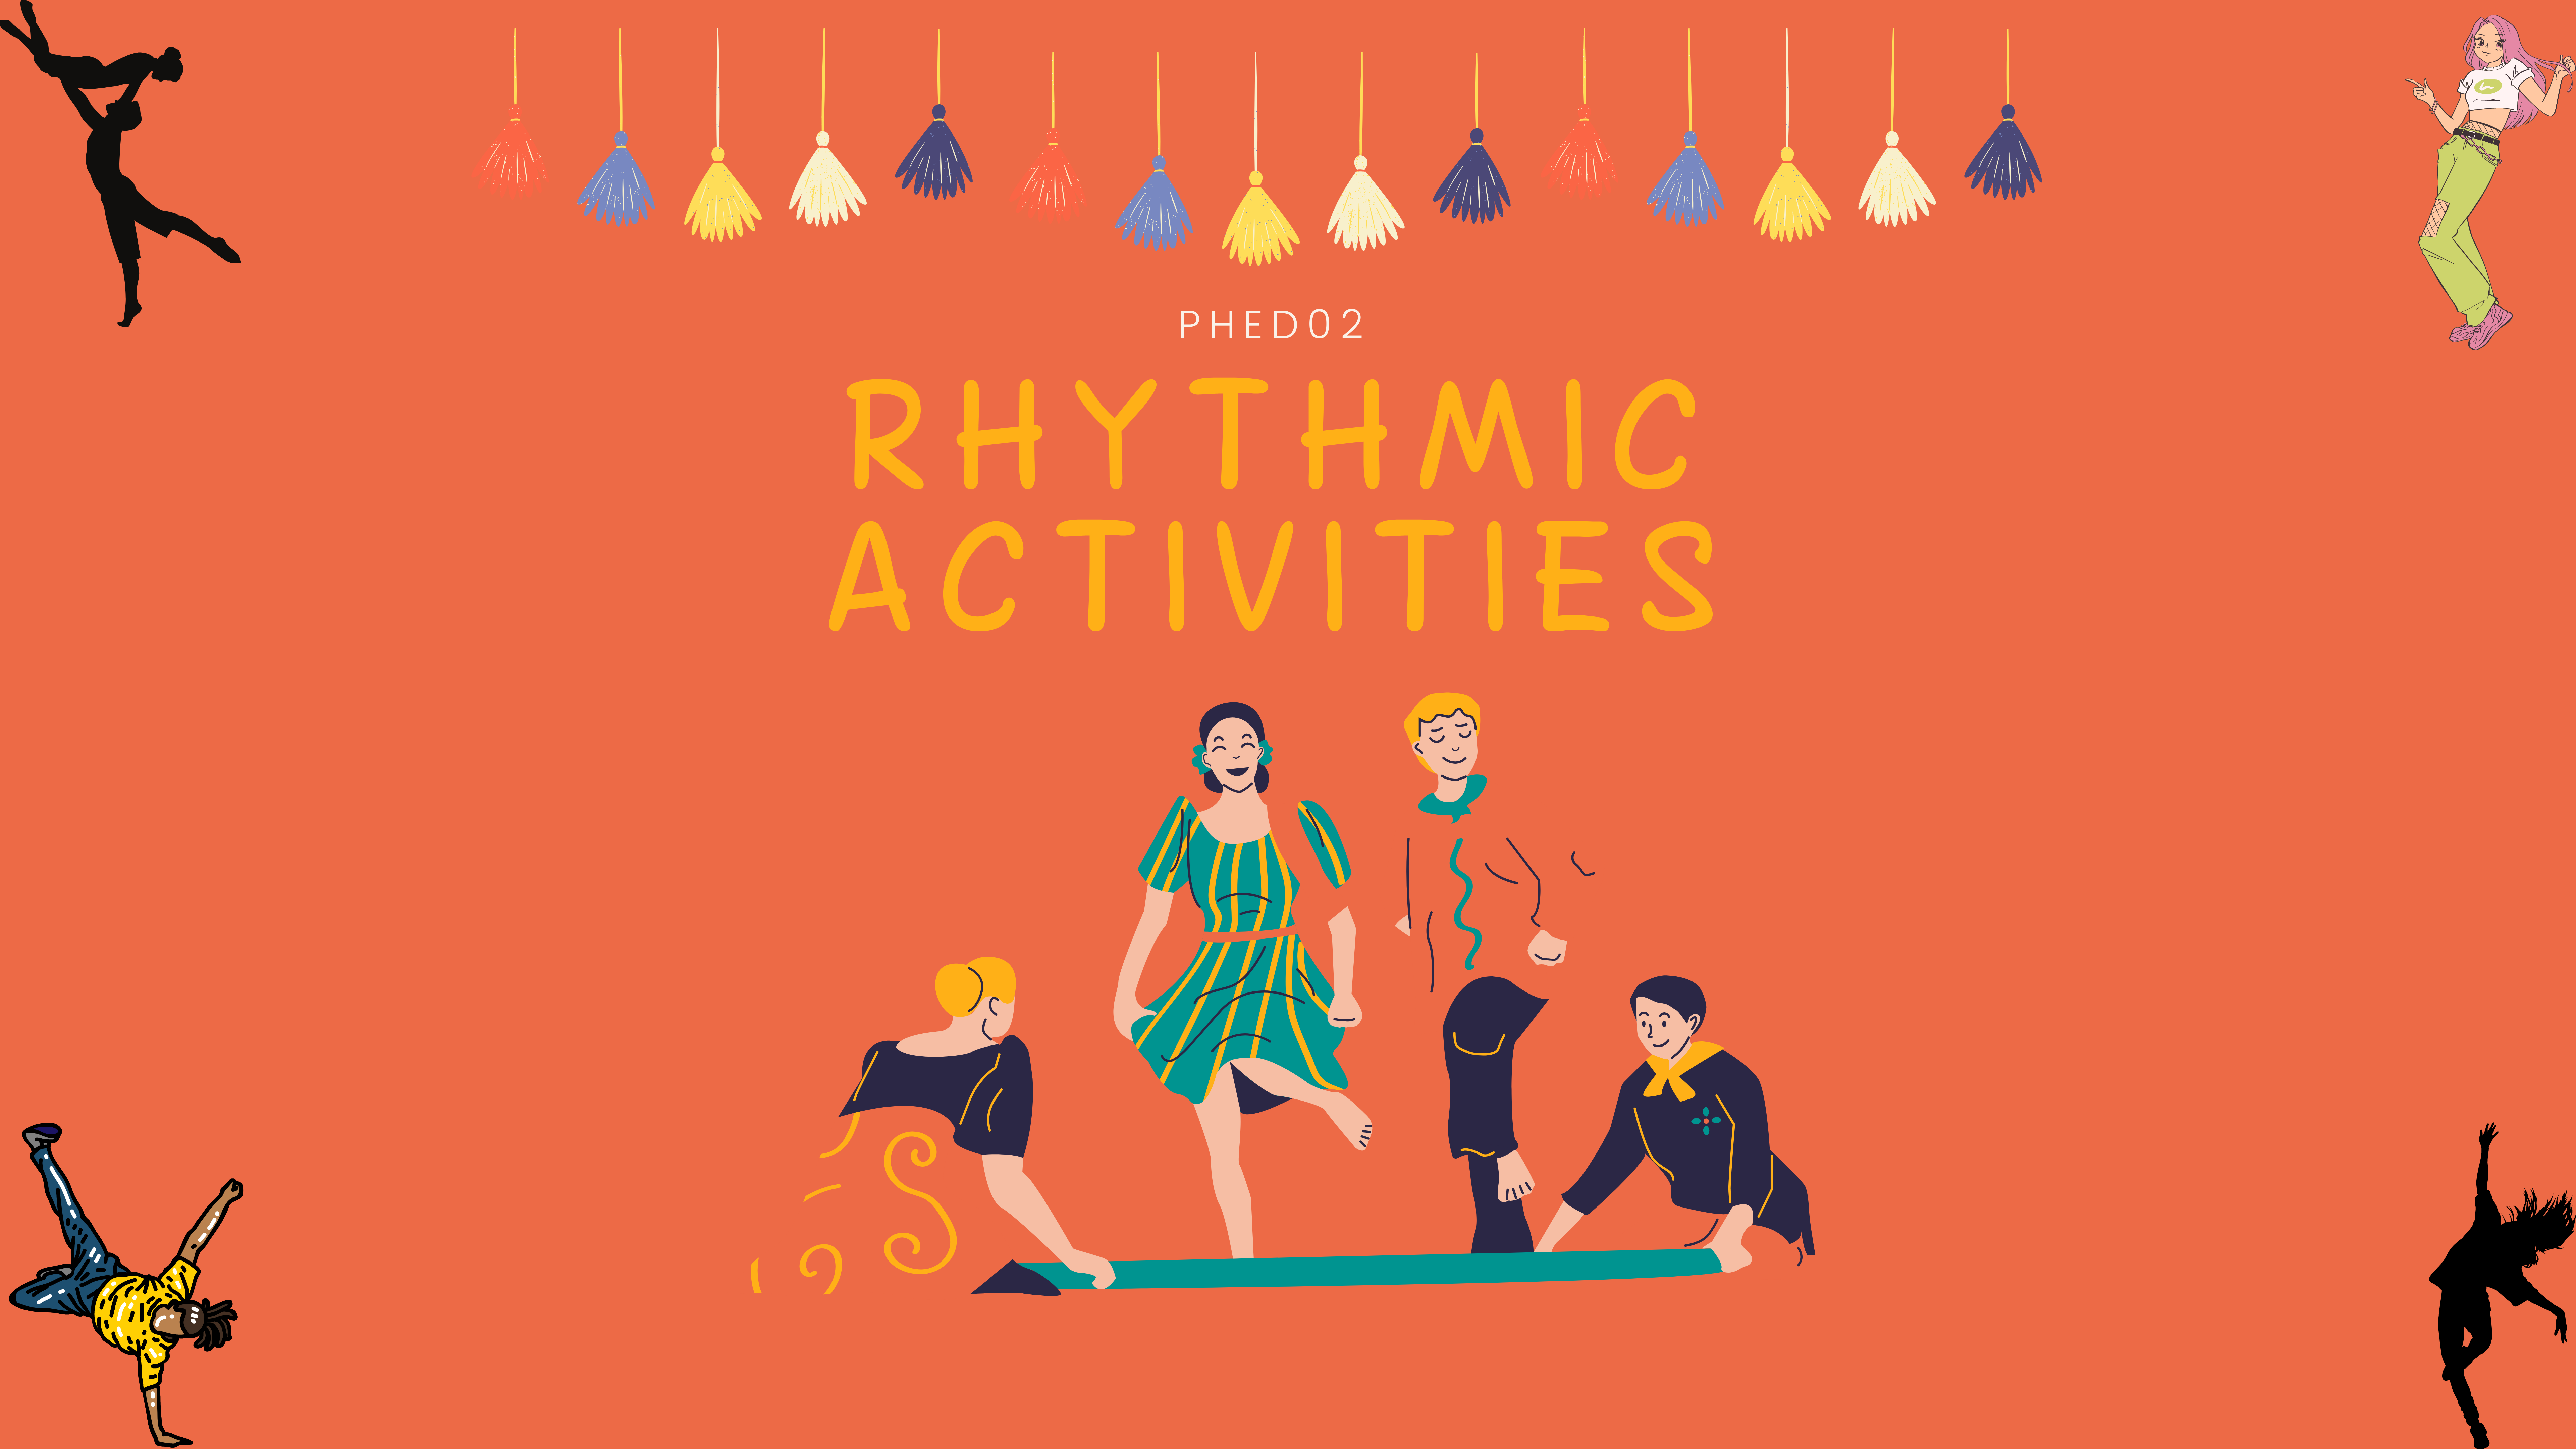 PHED02 - CPE1A - RHYTHMIC ACTIVITIES